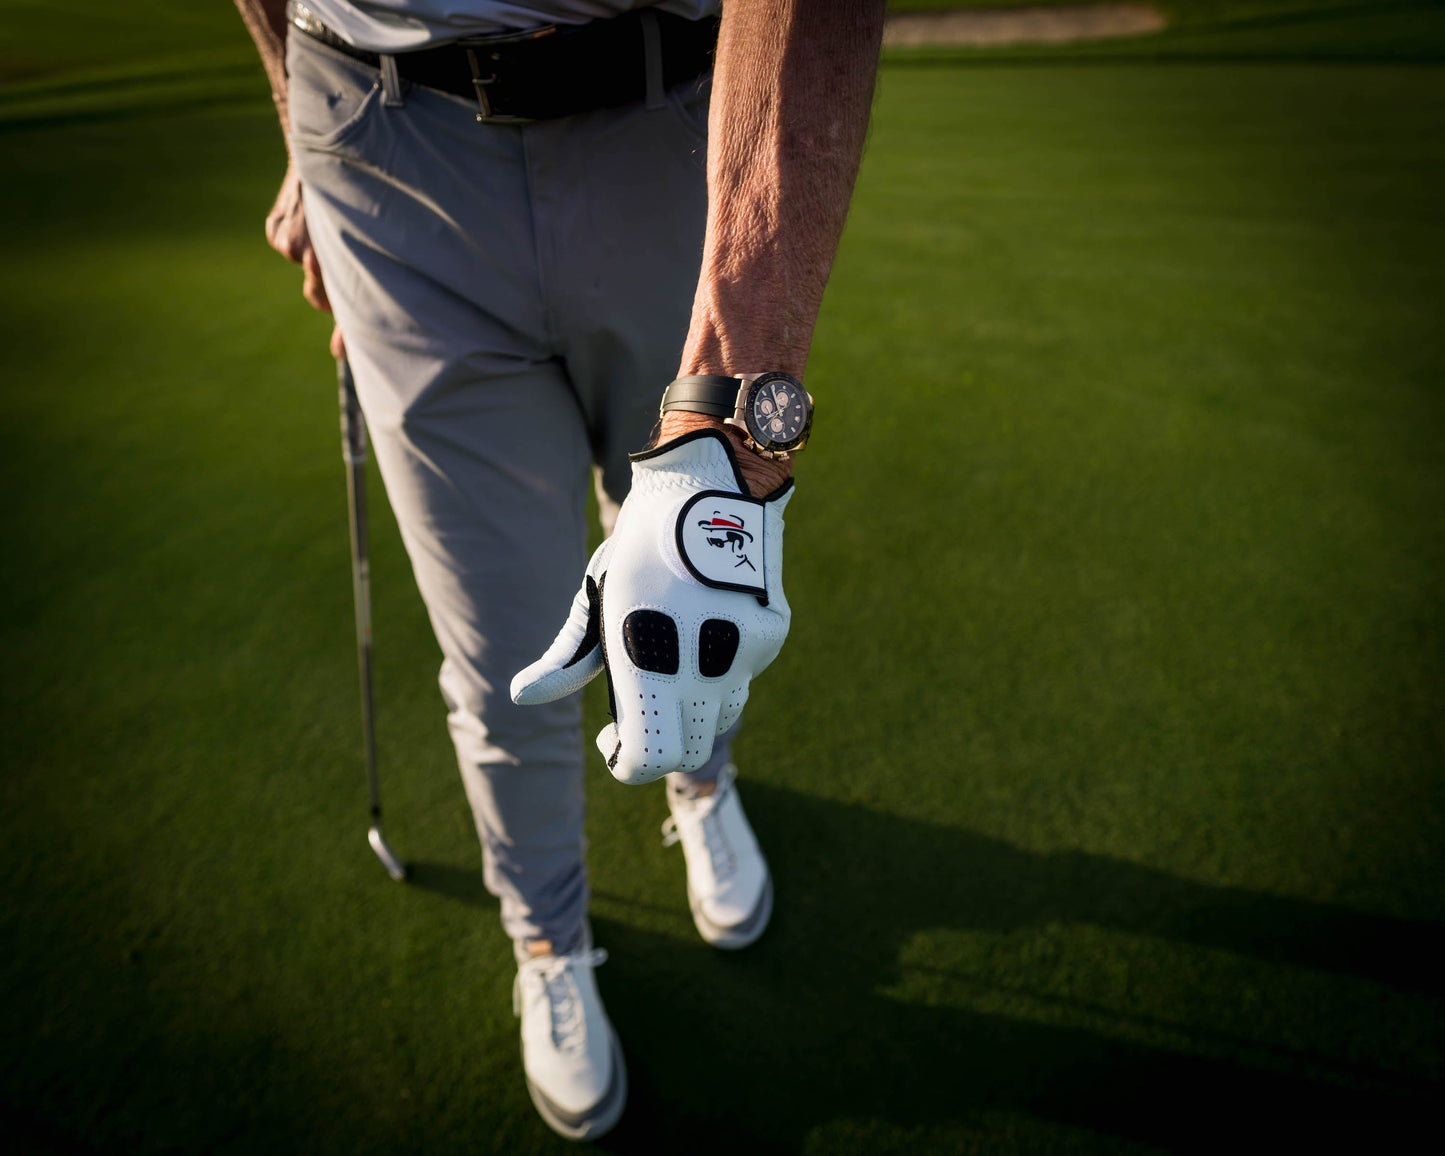 The Leadbetter Glove 3-Pack Bundle (pre-orders only)